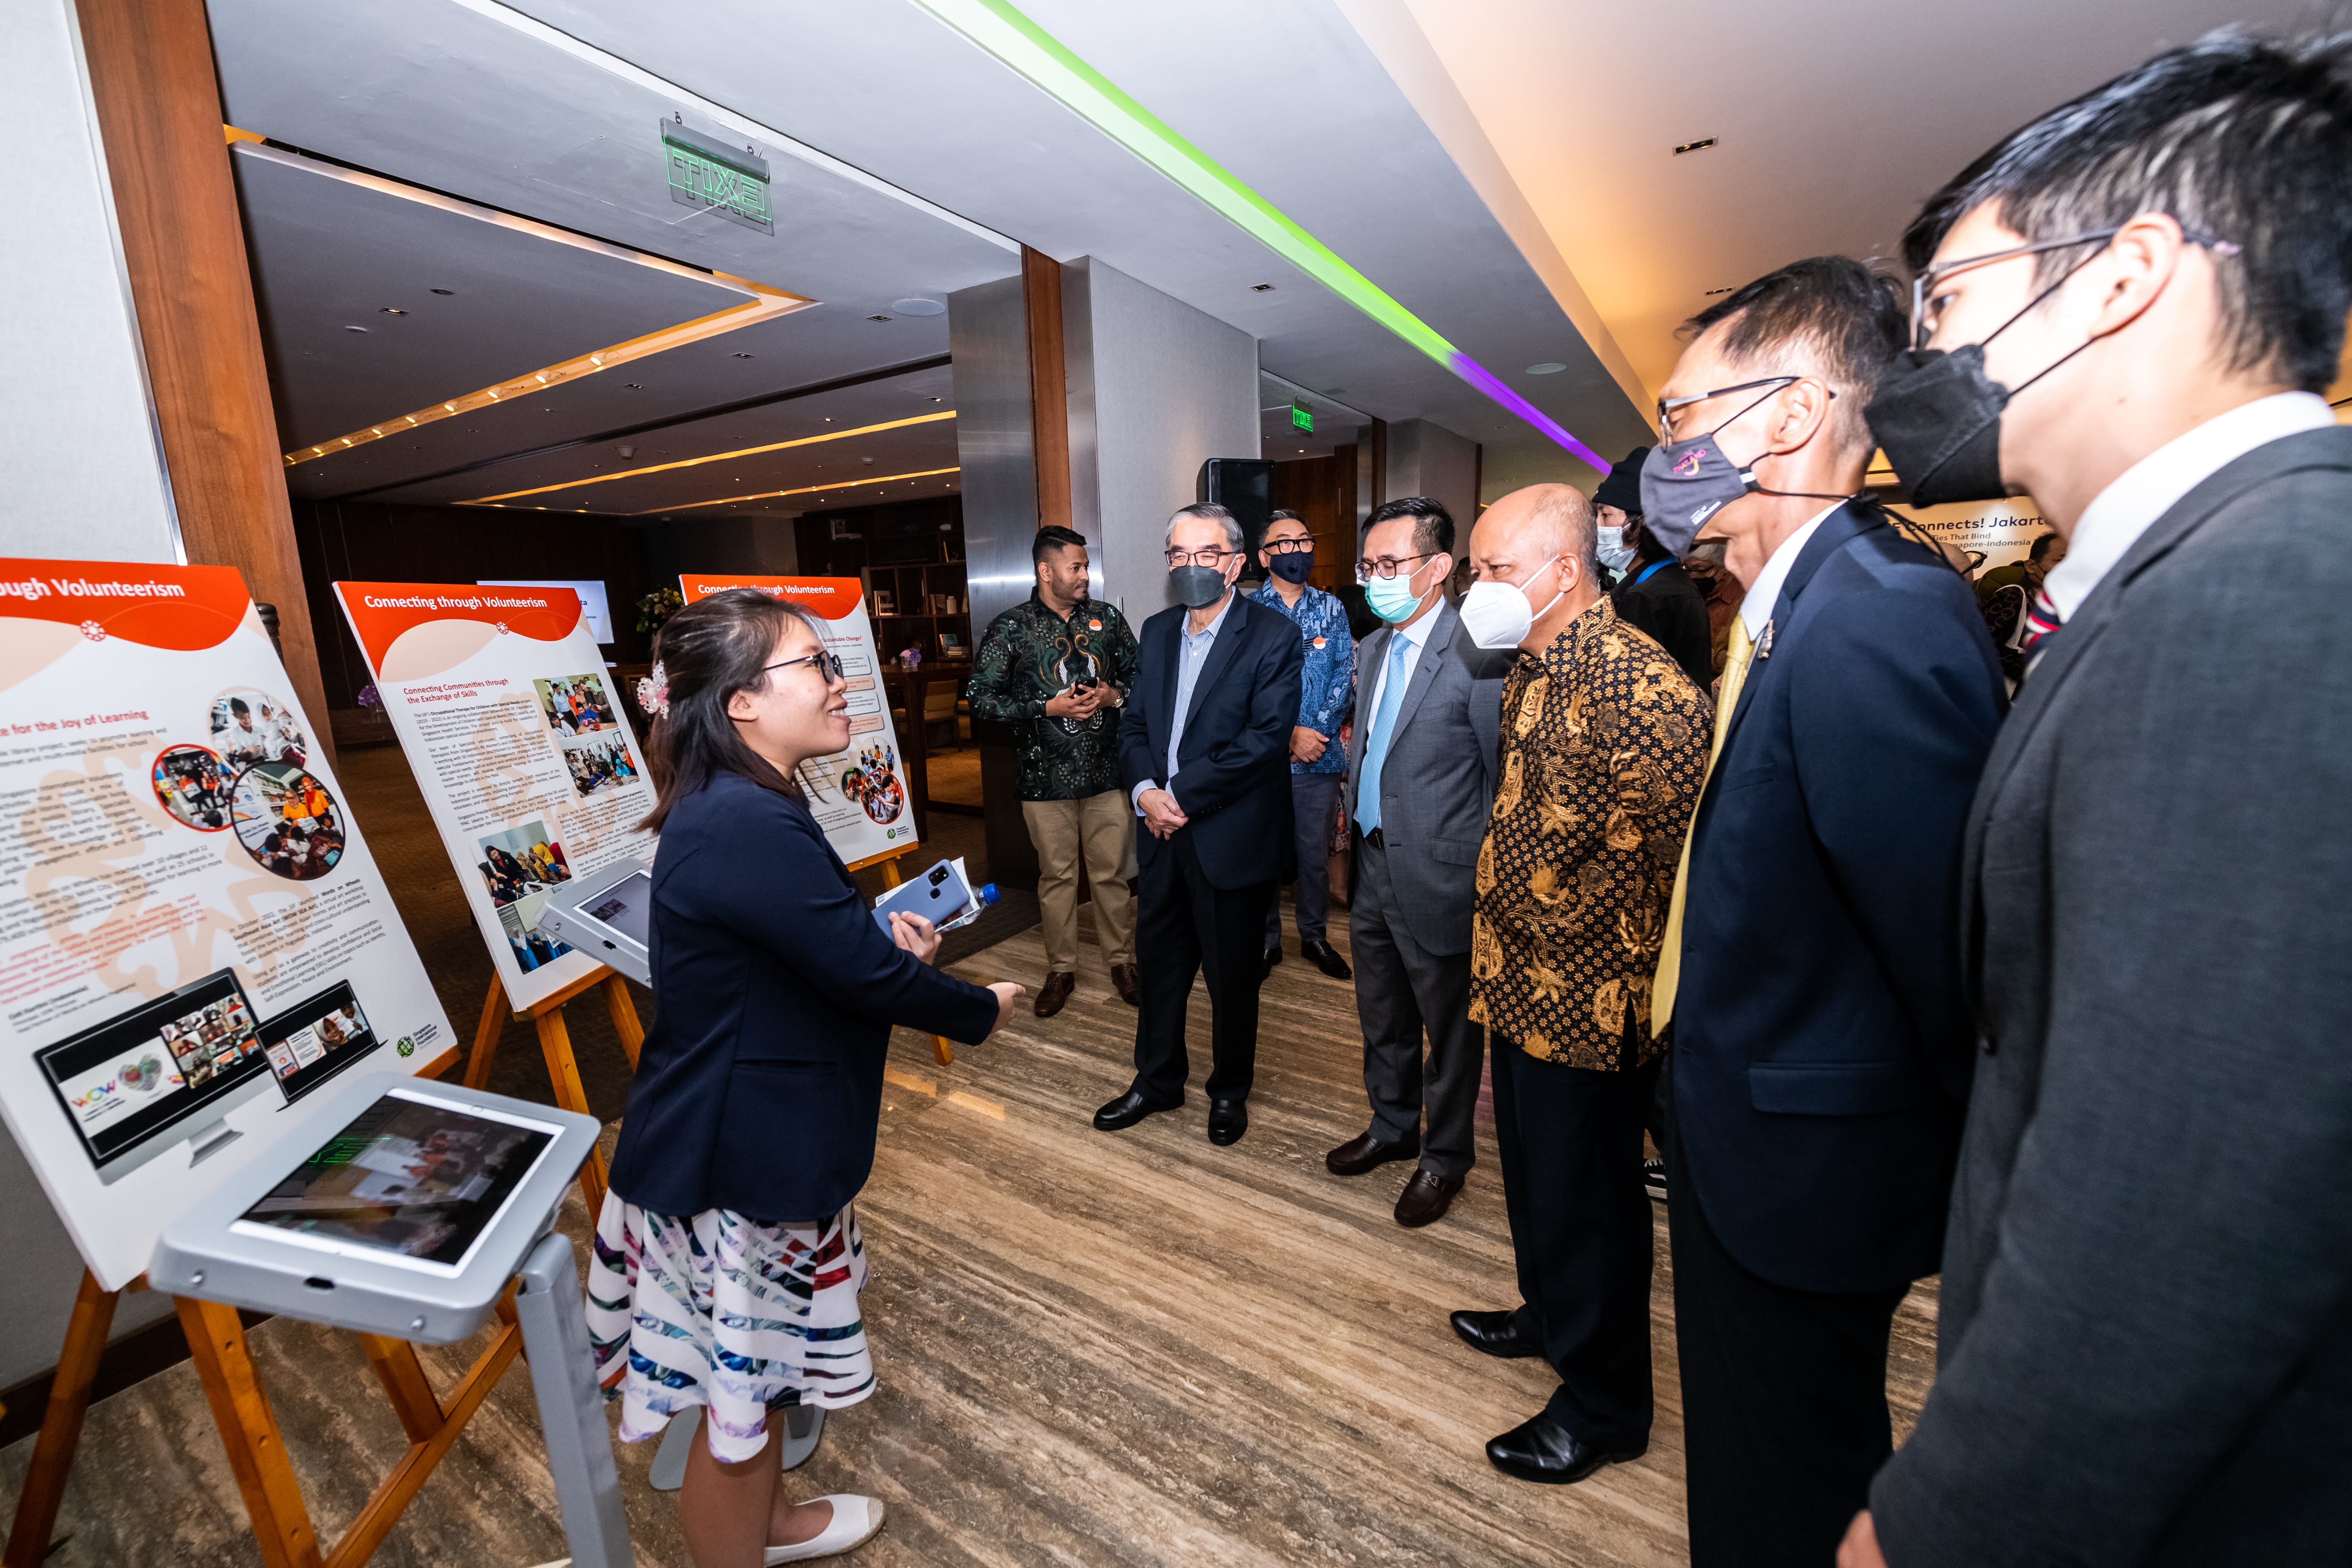 VIPs from the diplomatic community learning more about the SIF’s work in Indonesia during a tour at SIF Connects! Jakarta 